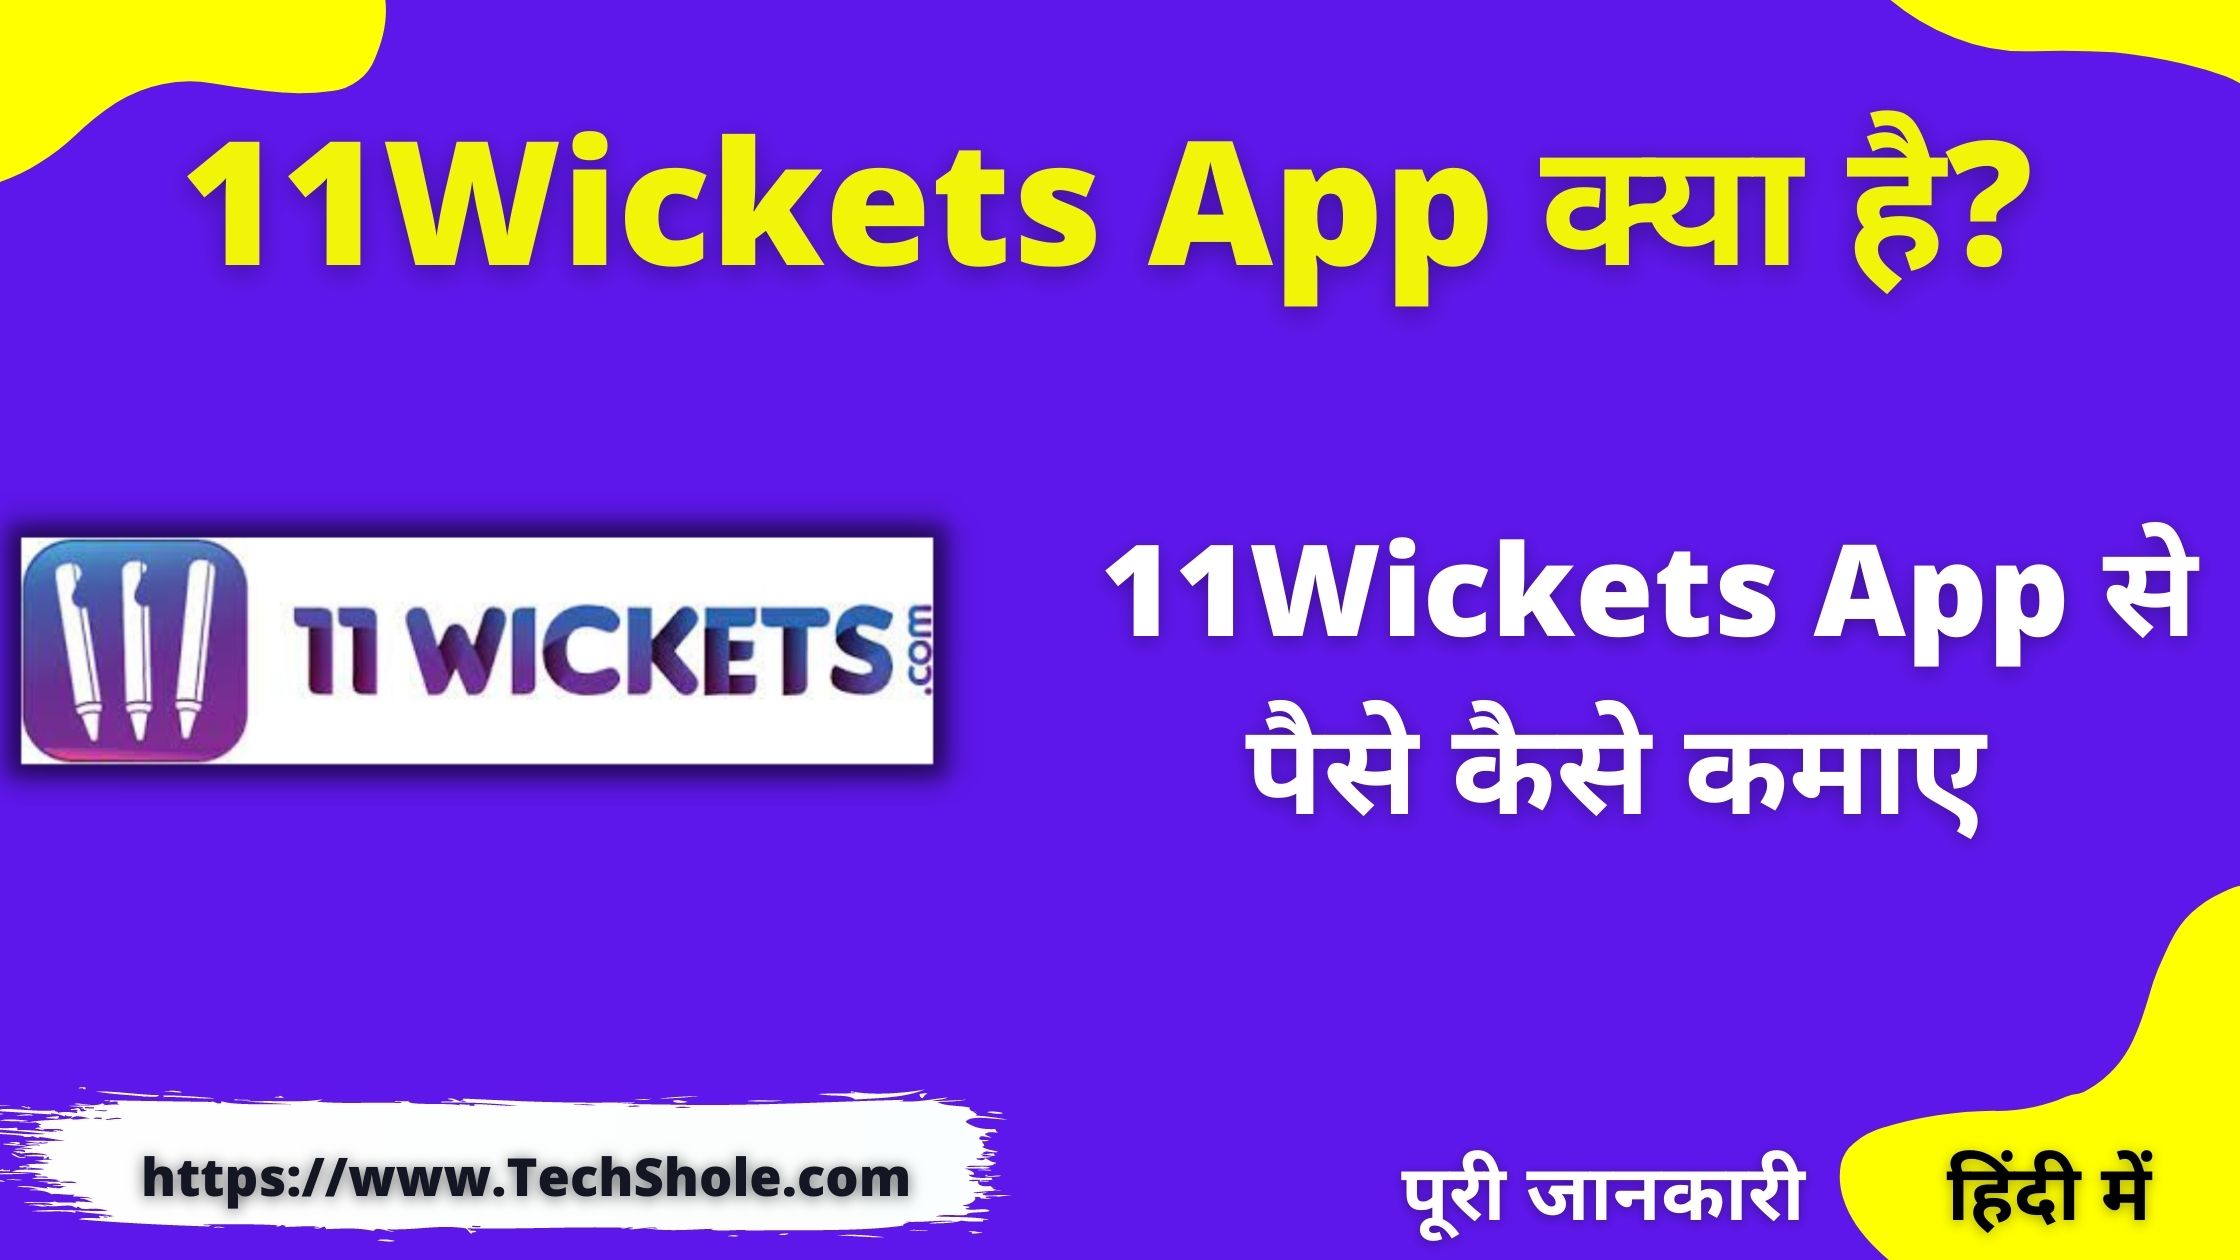 How to earn money from 11Wickets App in Hindi - 11Wickets App Se Paise Kaise kamaye Referral Code hindi